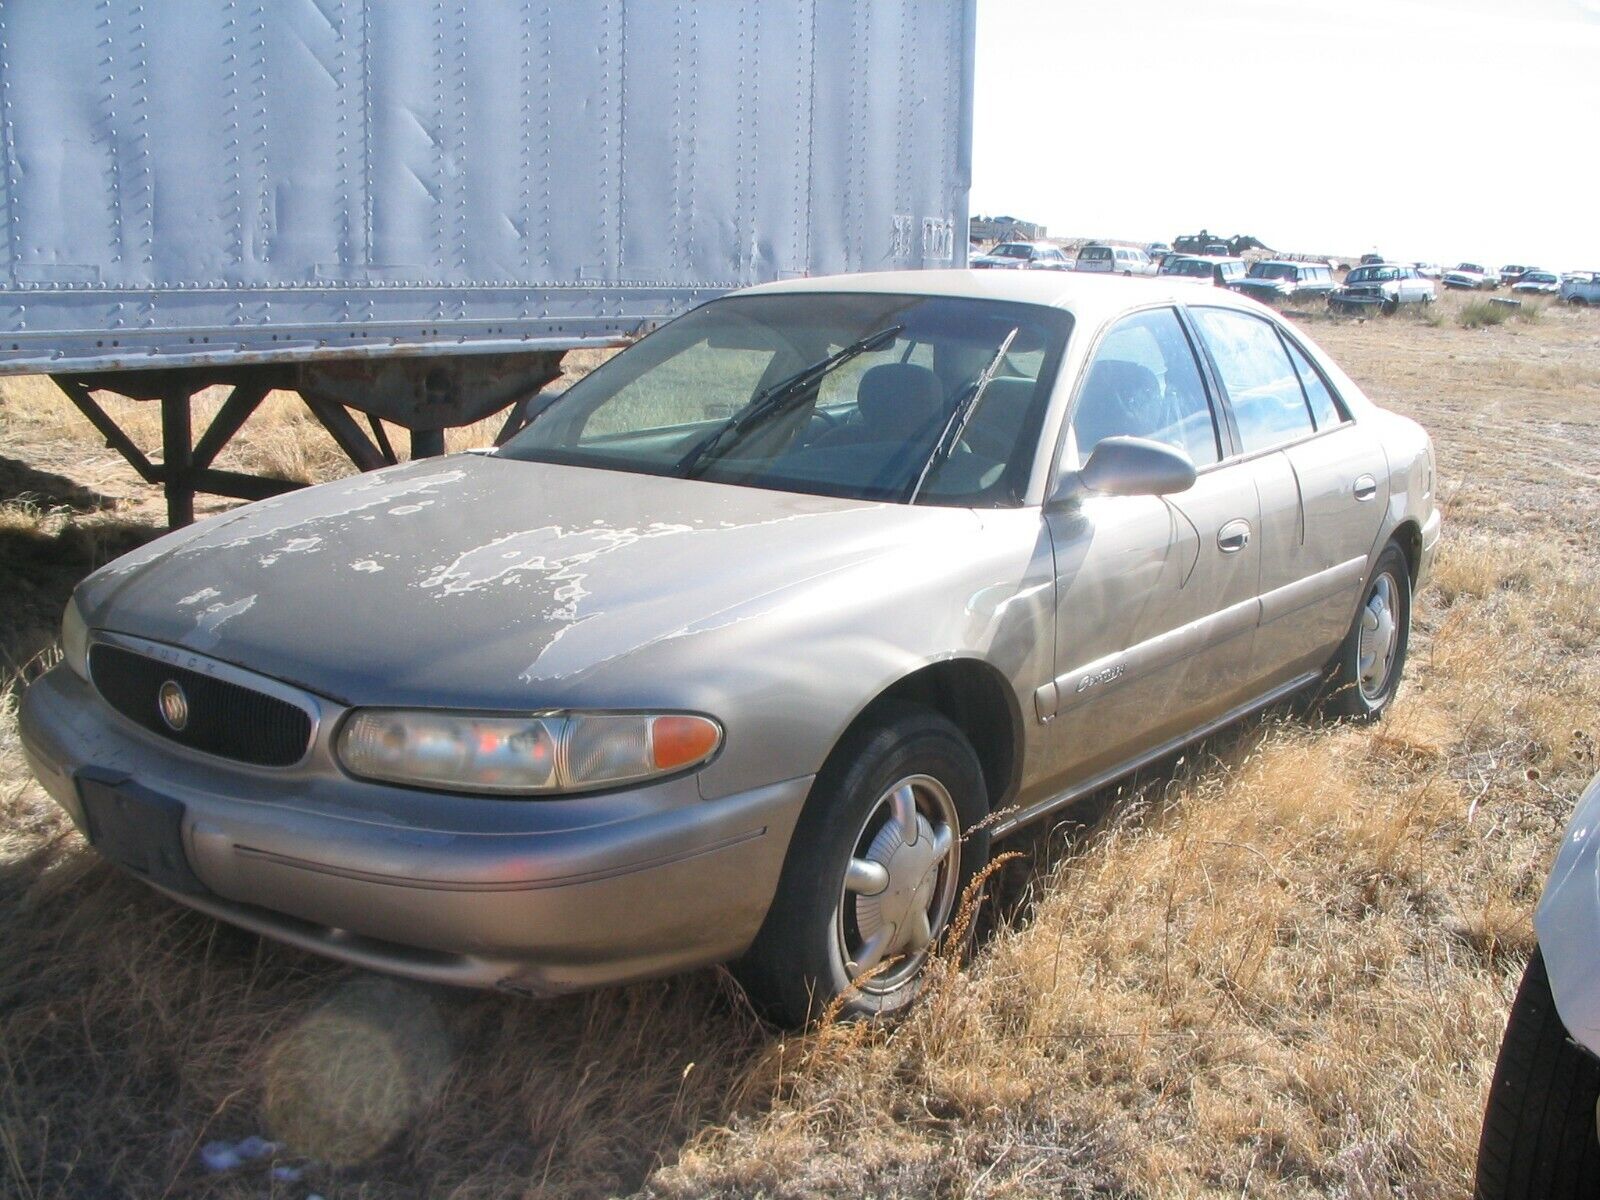 '00 2000 Buick Century - LAST CHANCE - parts only - WILL GO FOR SCRAP SOON  ! | eBay